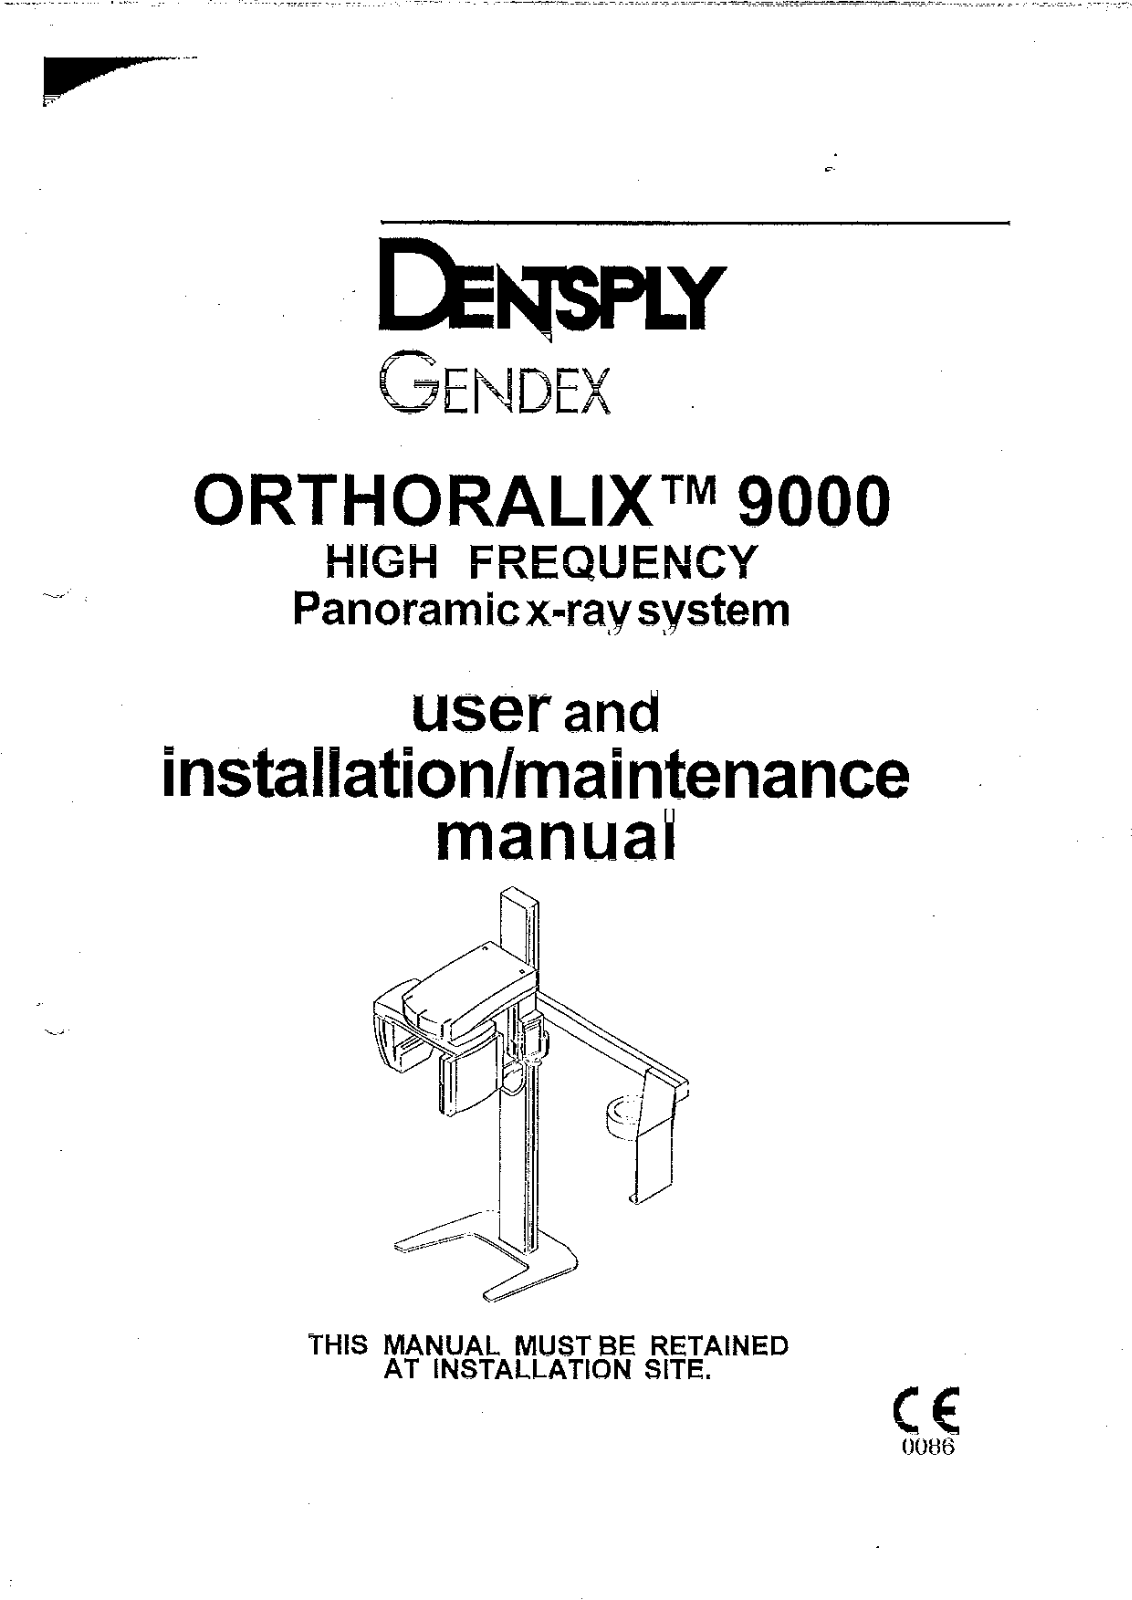 Gendex Orthoralix 9000 User and installation manual